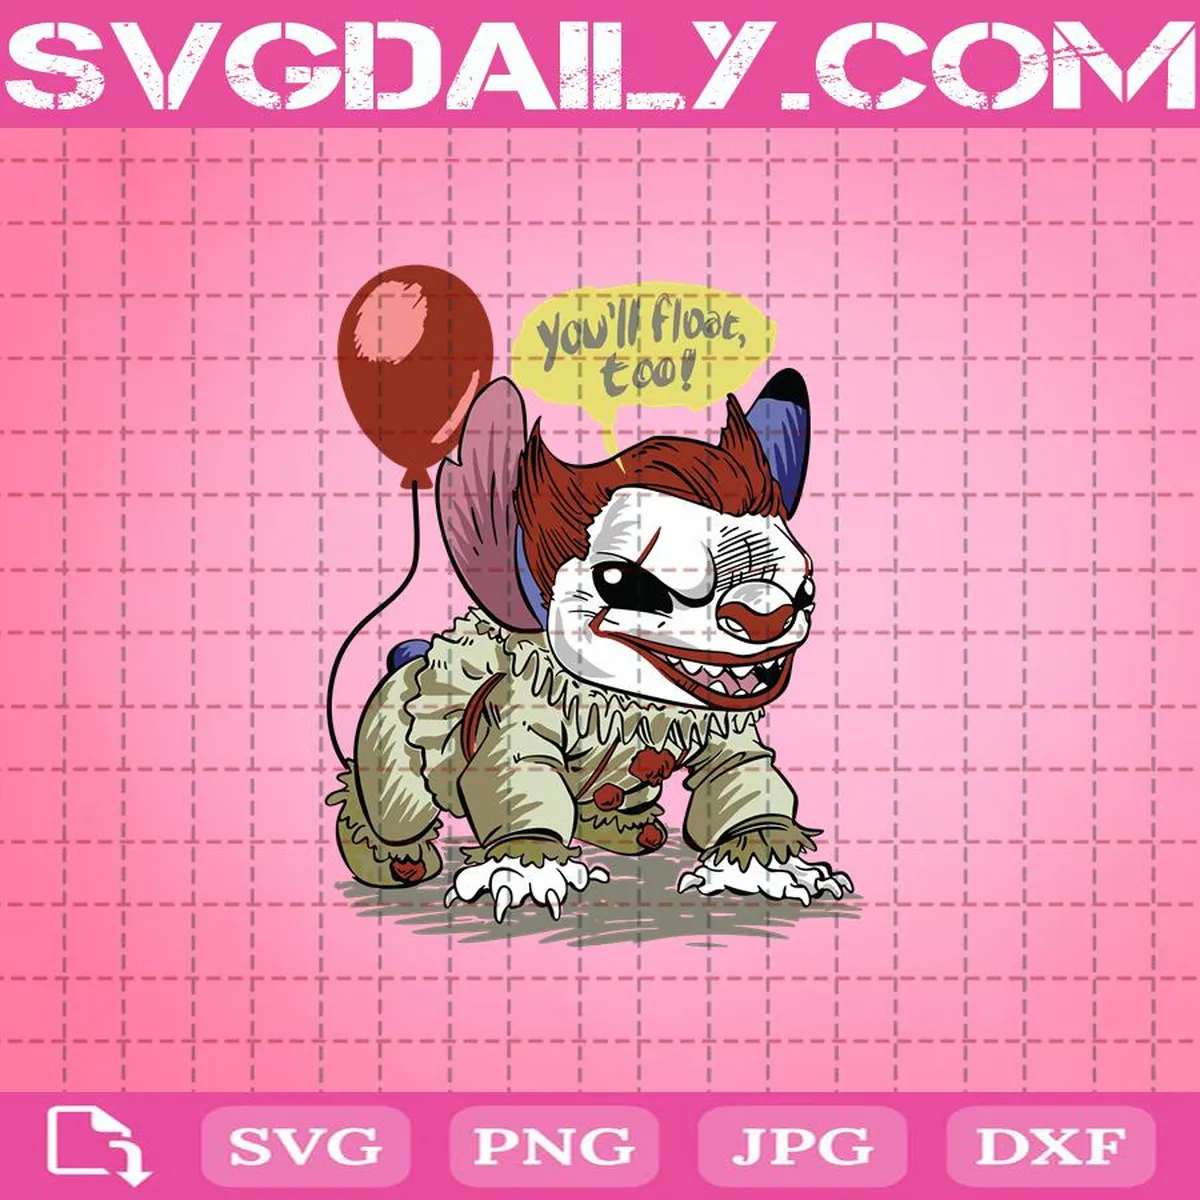 Pennywise Stitch Svg, Pennywise Disney Halloween Svg, Halloween Svg, Disney Halloween Svg, Cricut Digital Download, Instant Download